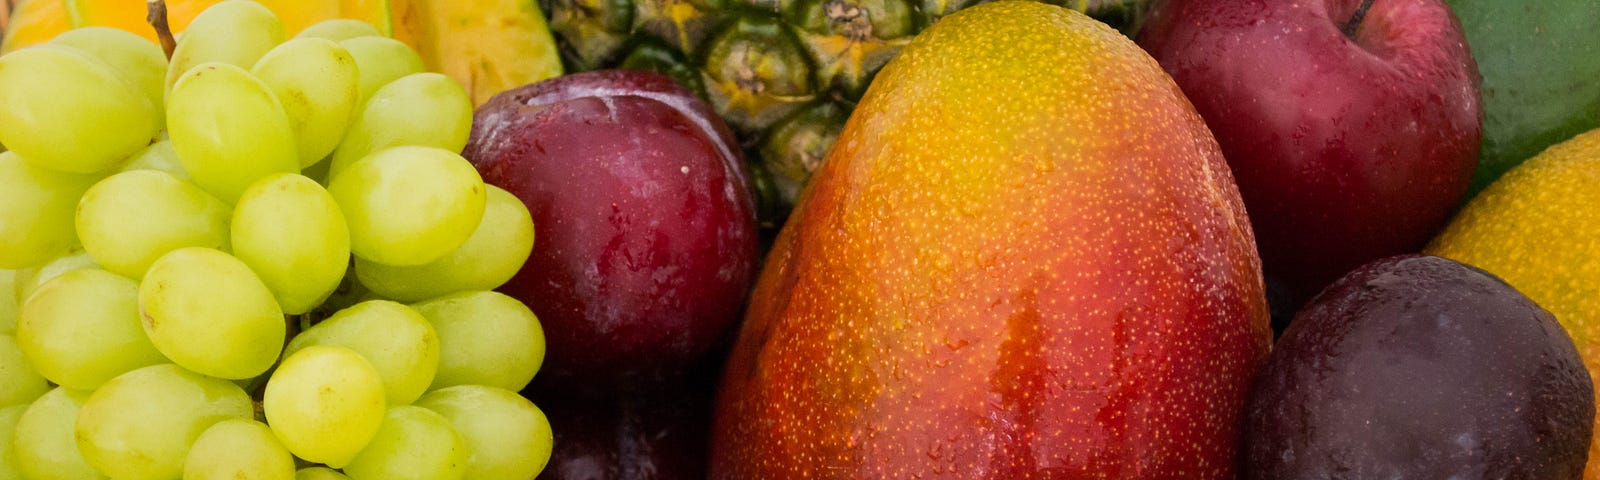 A No-Nonsense Guide to Choosing the Perfect Fruit Every Time